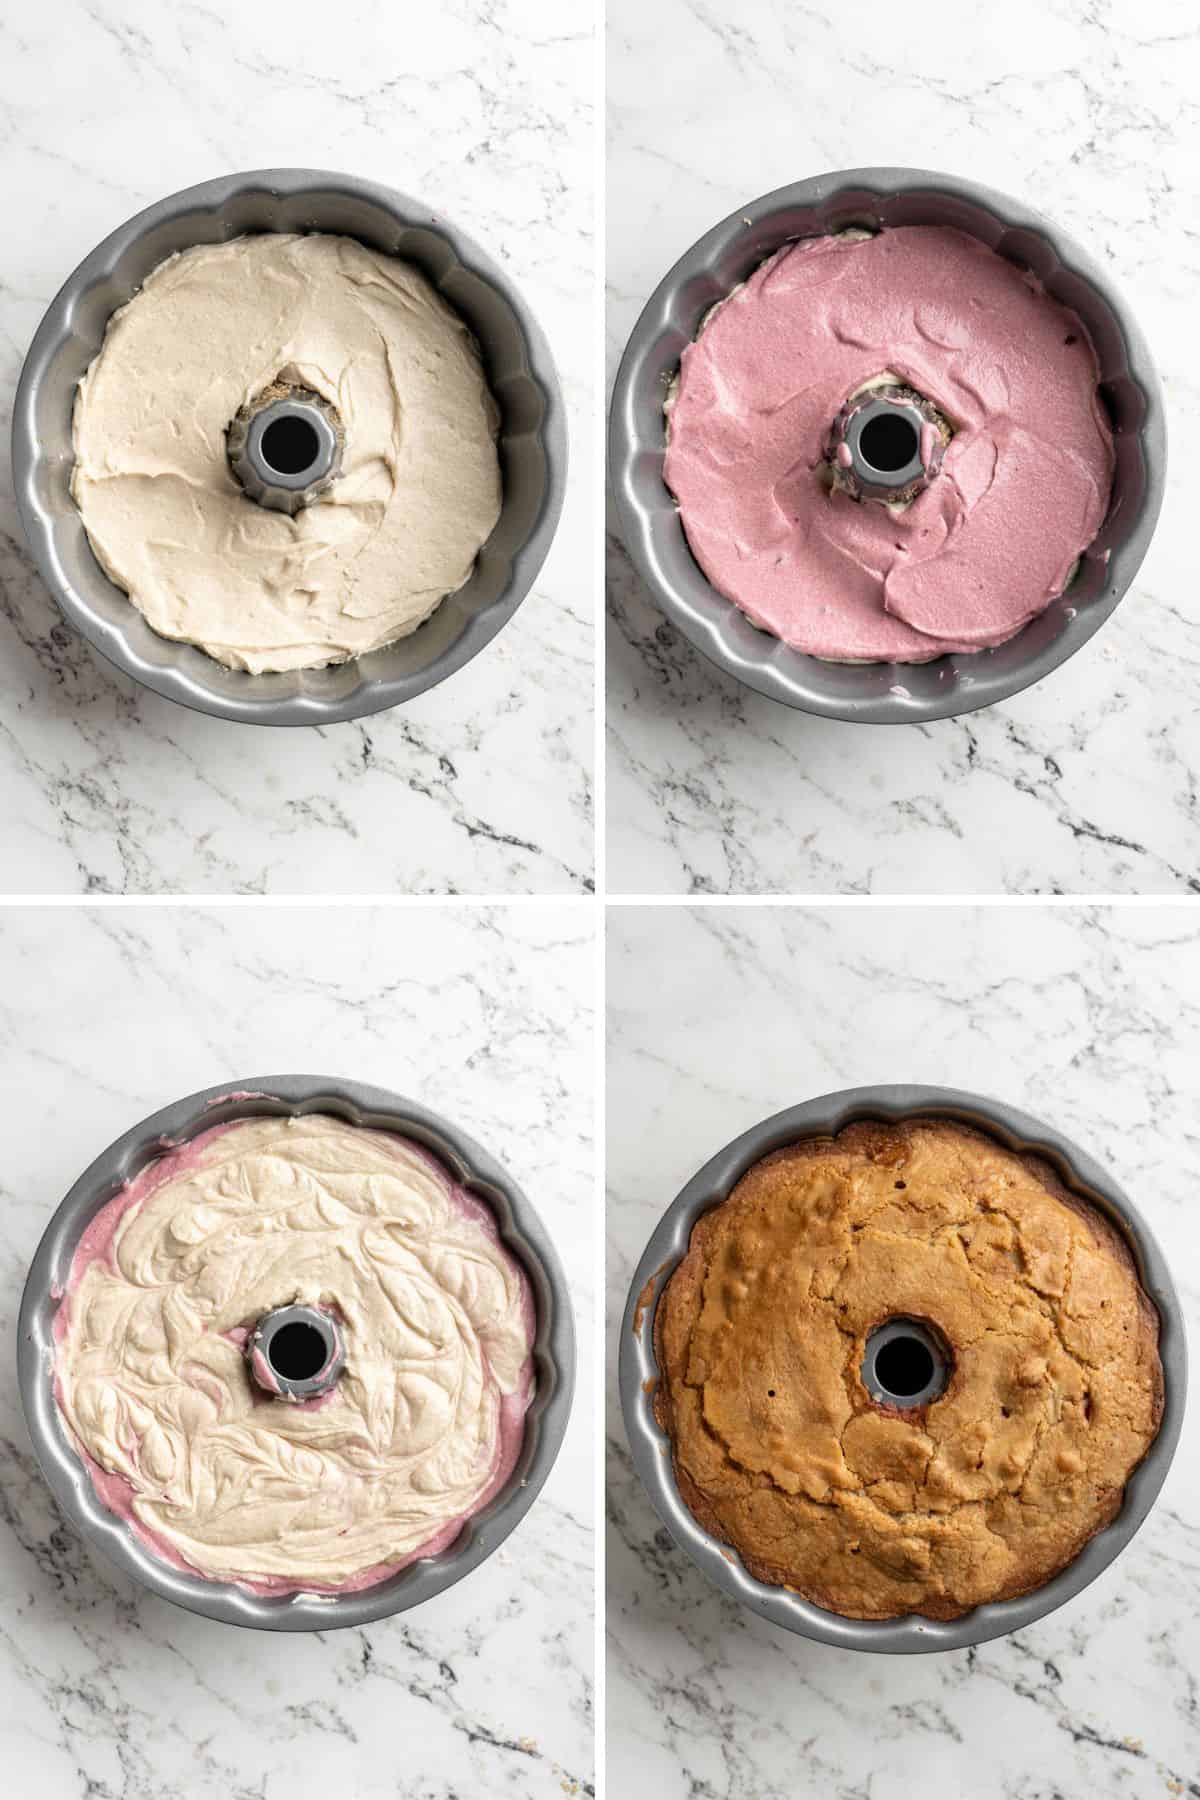 A collage of images showing how to add the two different types of batter to create a swirled cake.